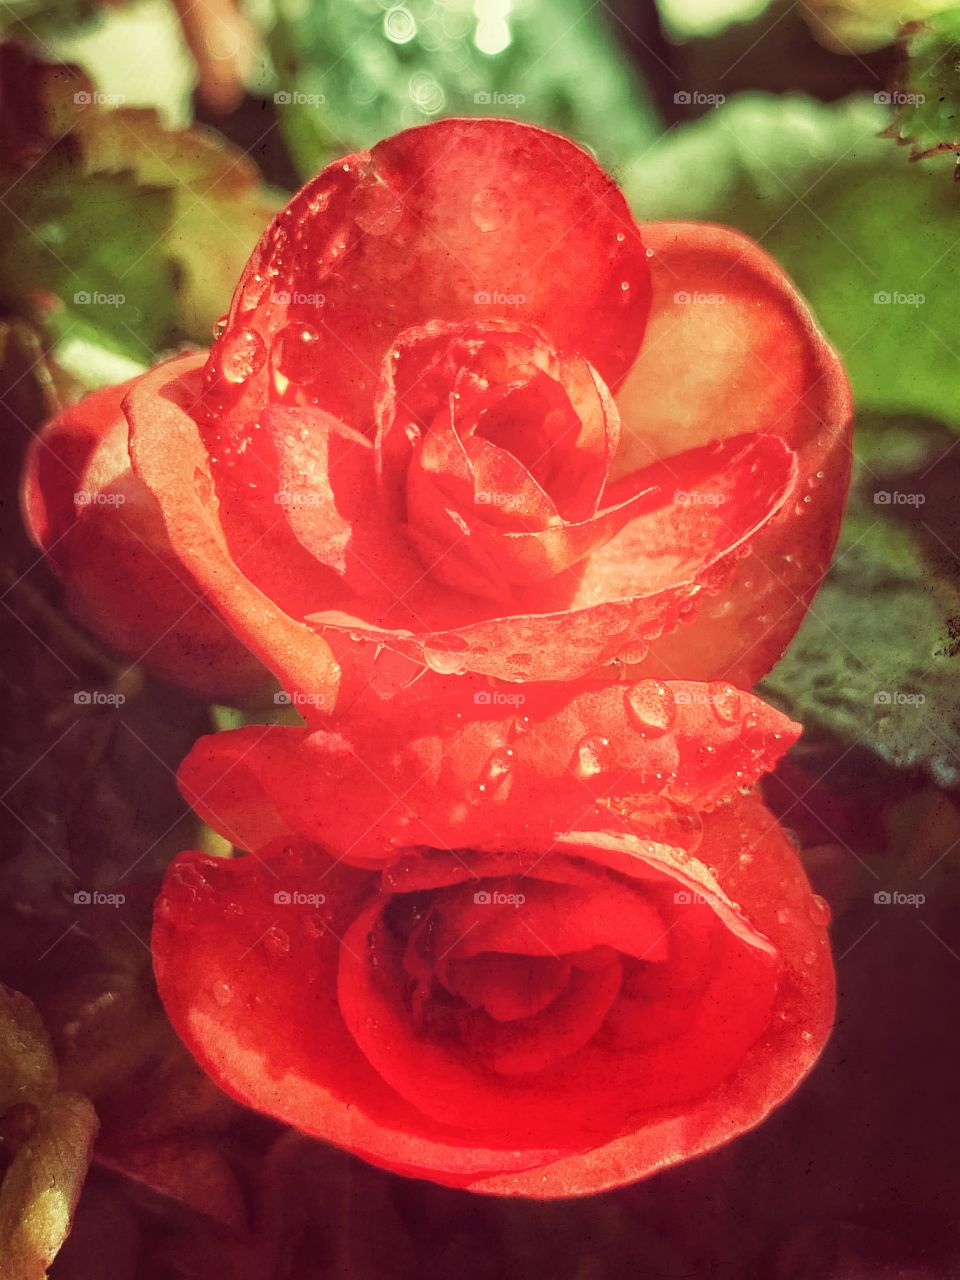 Wax begonia flower blossoms with red petals and water drops. Spring and summer plant.